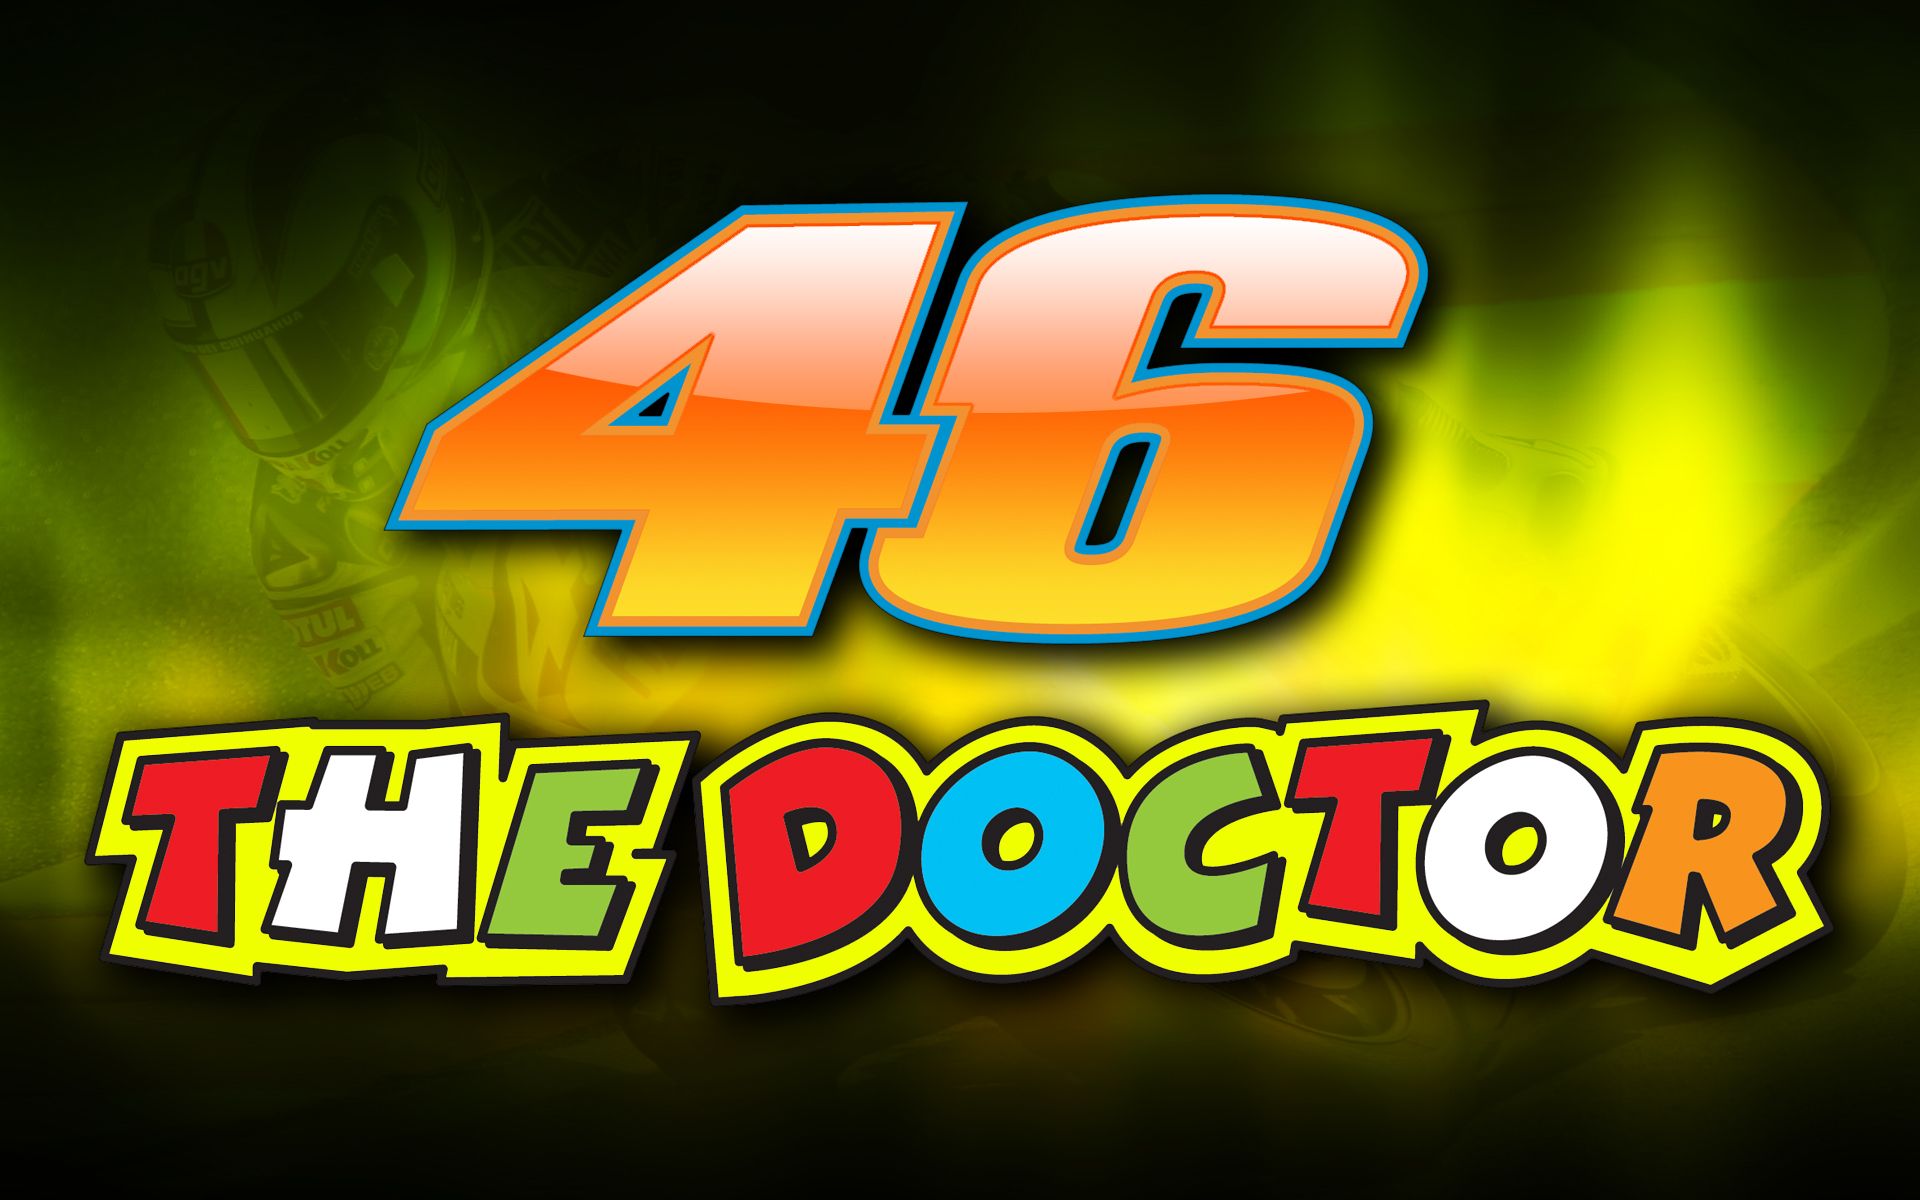 Font rossi the doctor.ttf